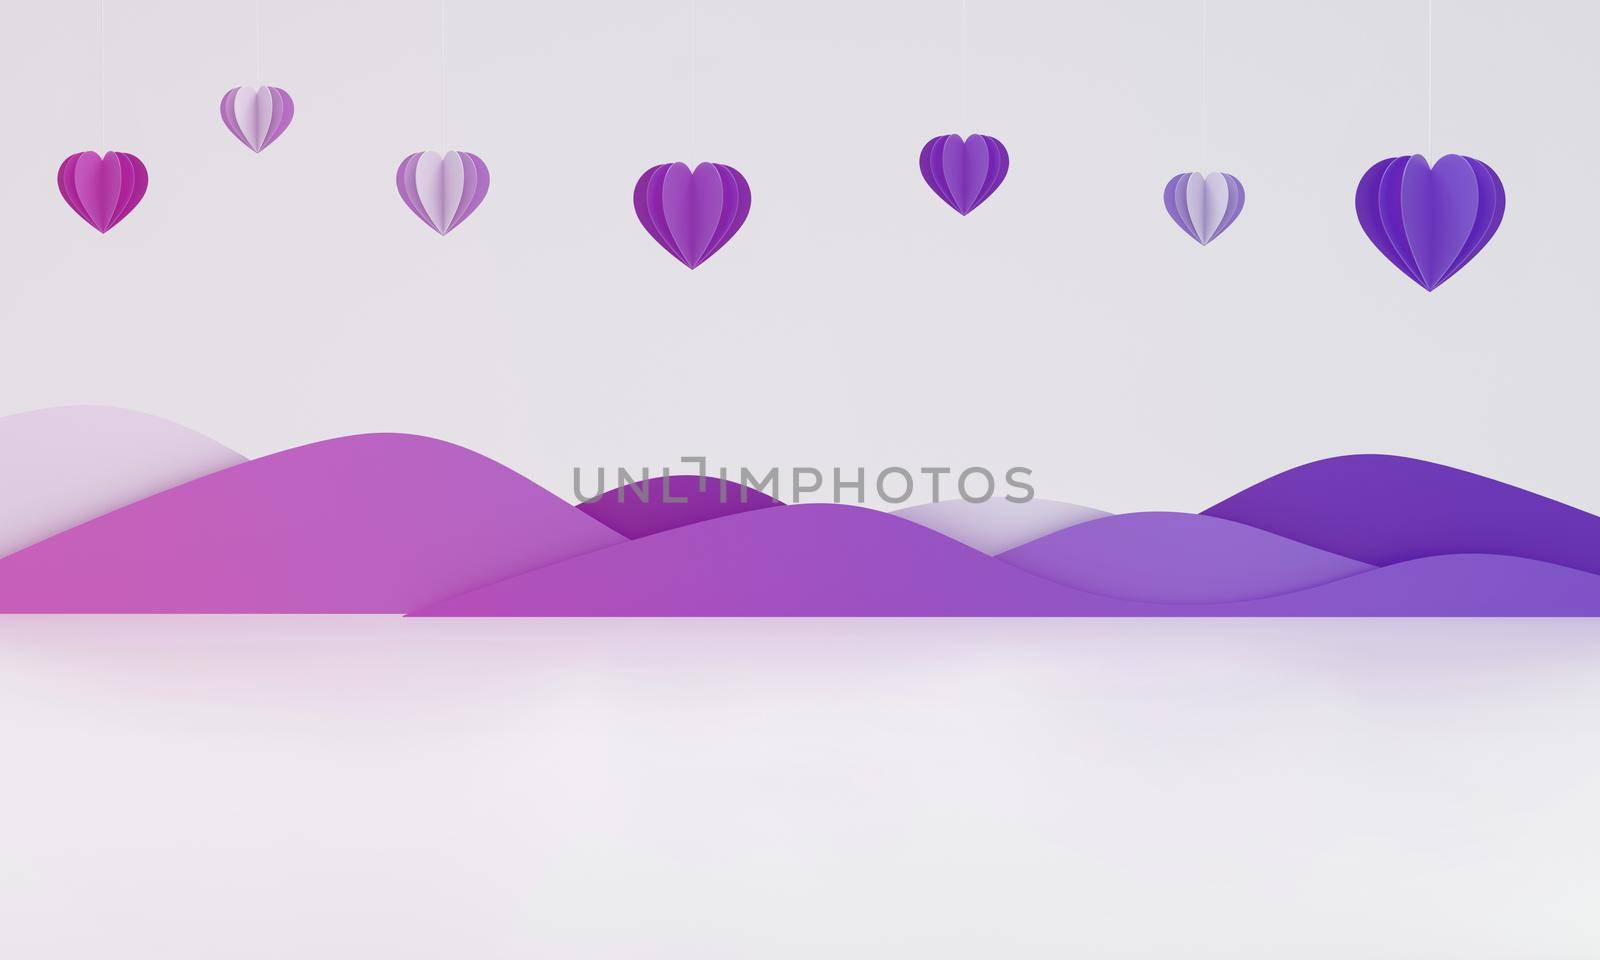 Hanging paper hearts and a theatrical stage of mountains. Gift card or poster. 3D illustration.